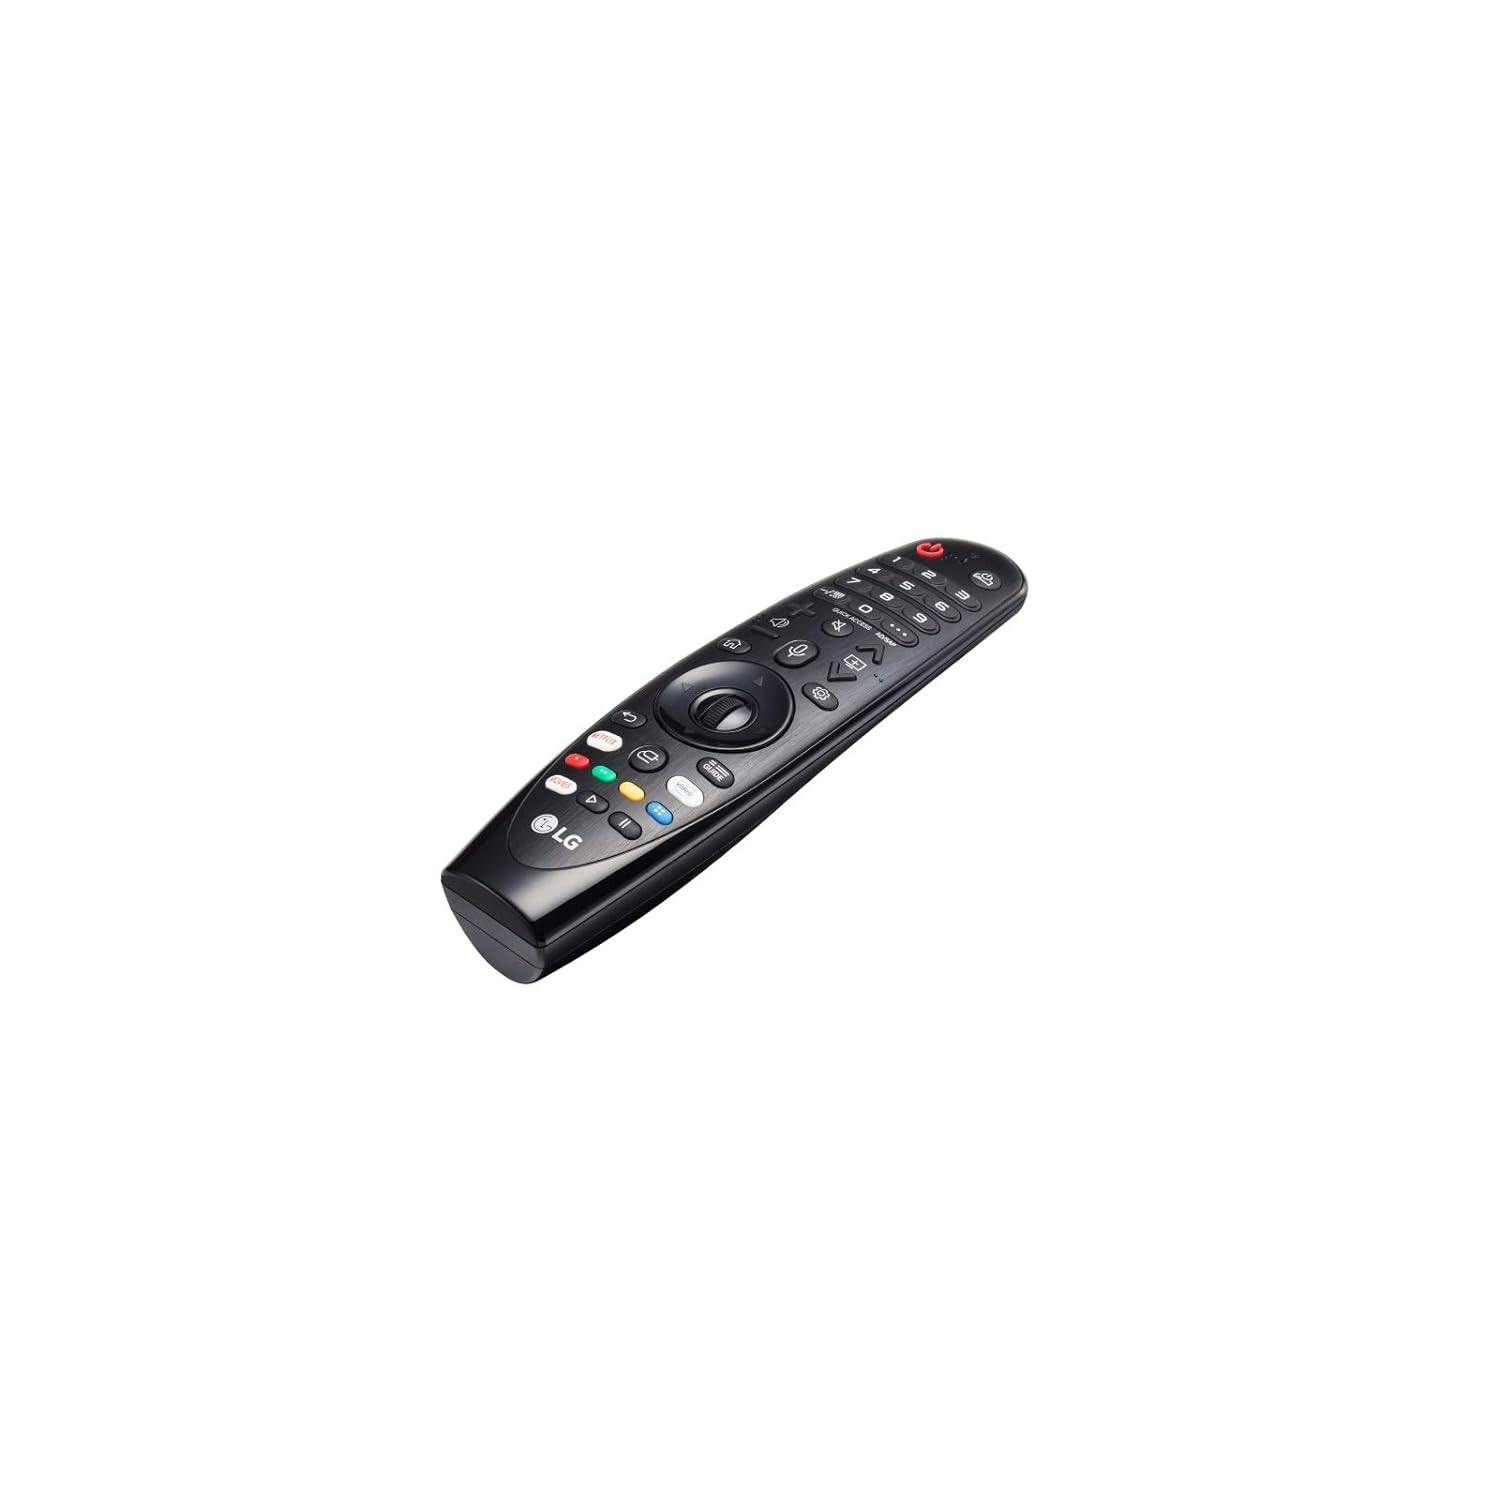 LG An-Mr19Ba Magic Remote Control With Voice Recognition For Select 2019 Smarttv